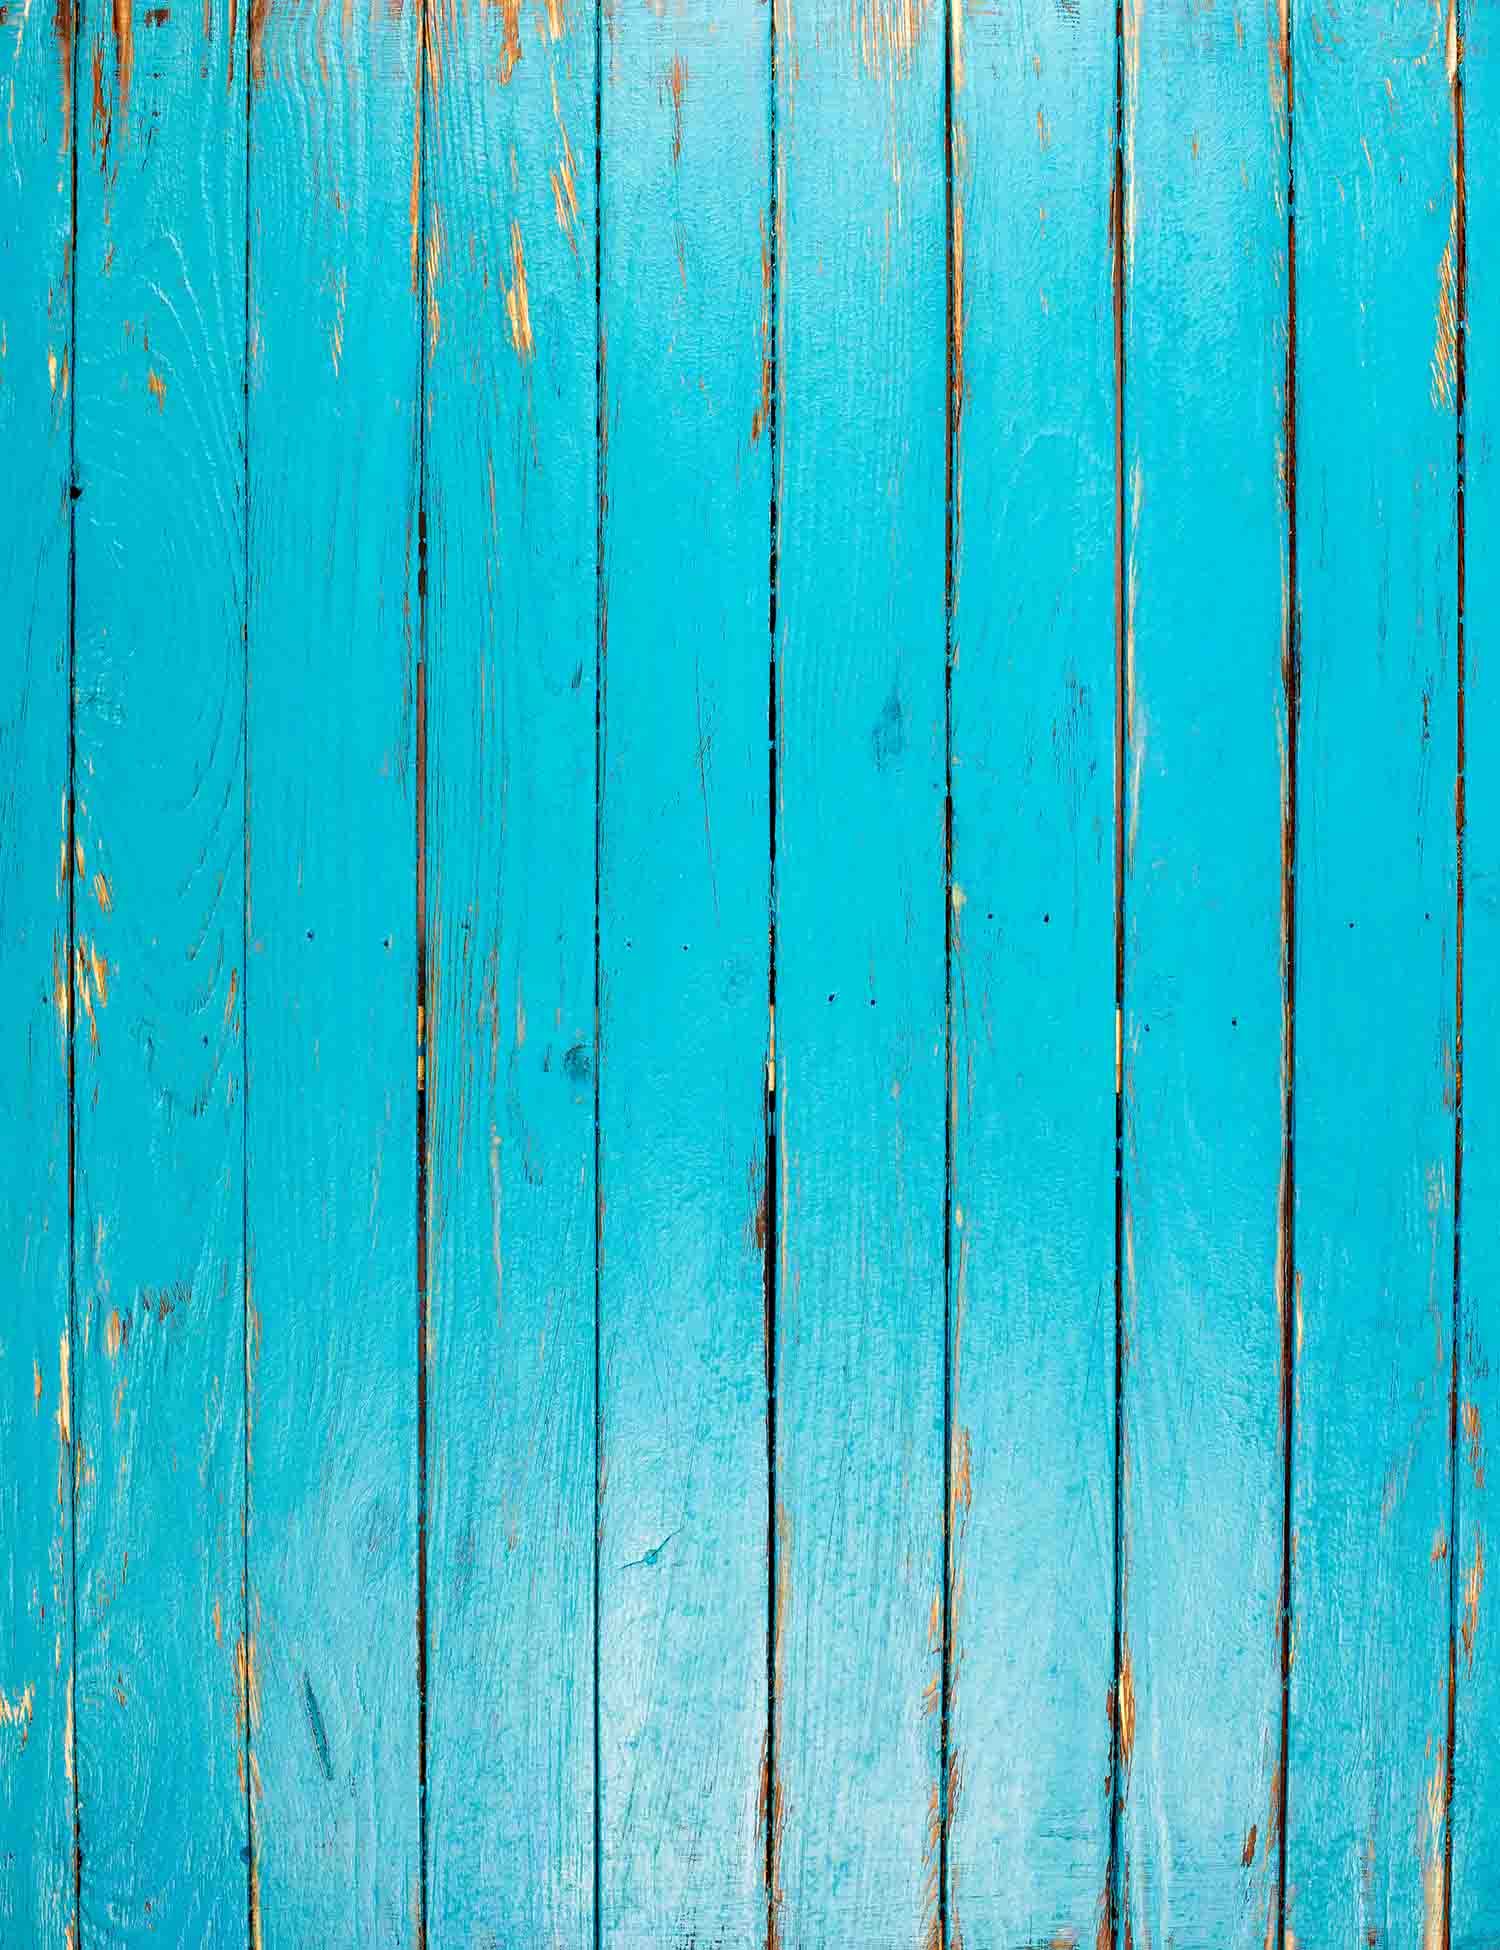 Grunge Blue Wood Floor Texture  Backdrop For Photography Shopbackdrop